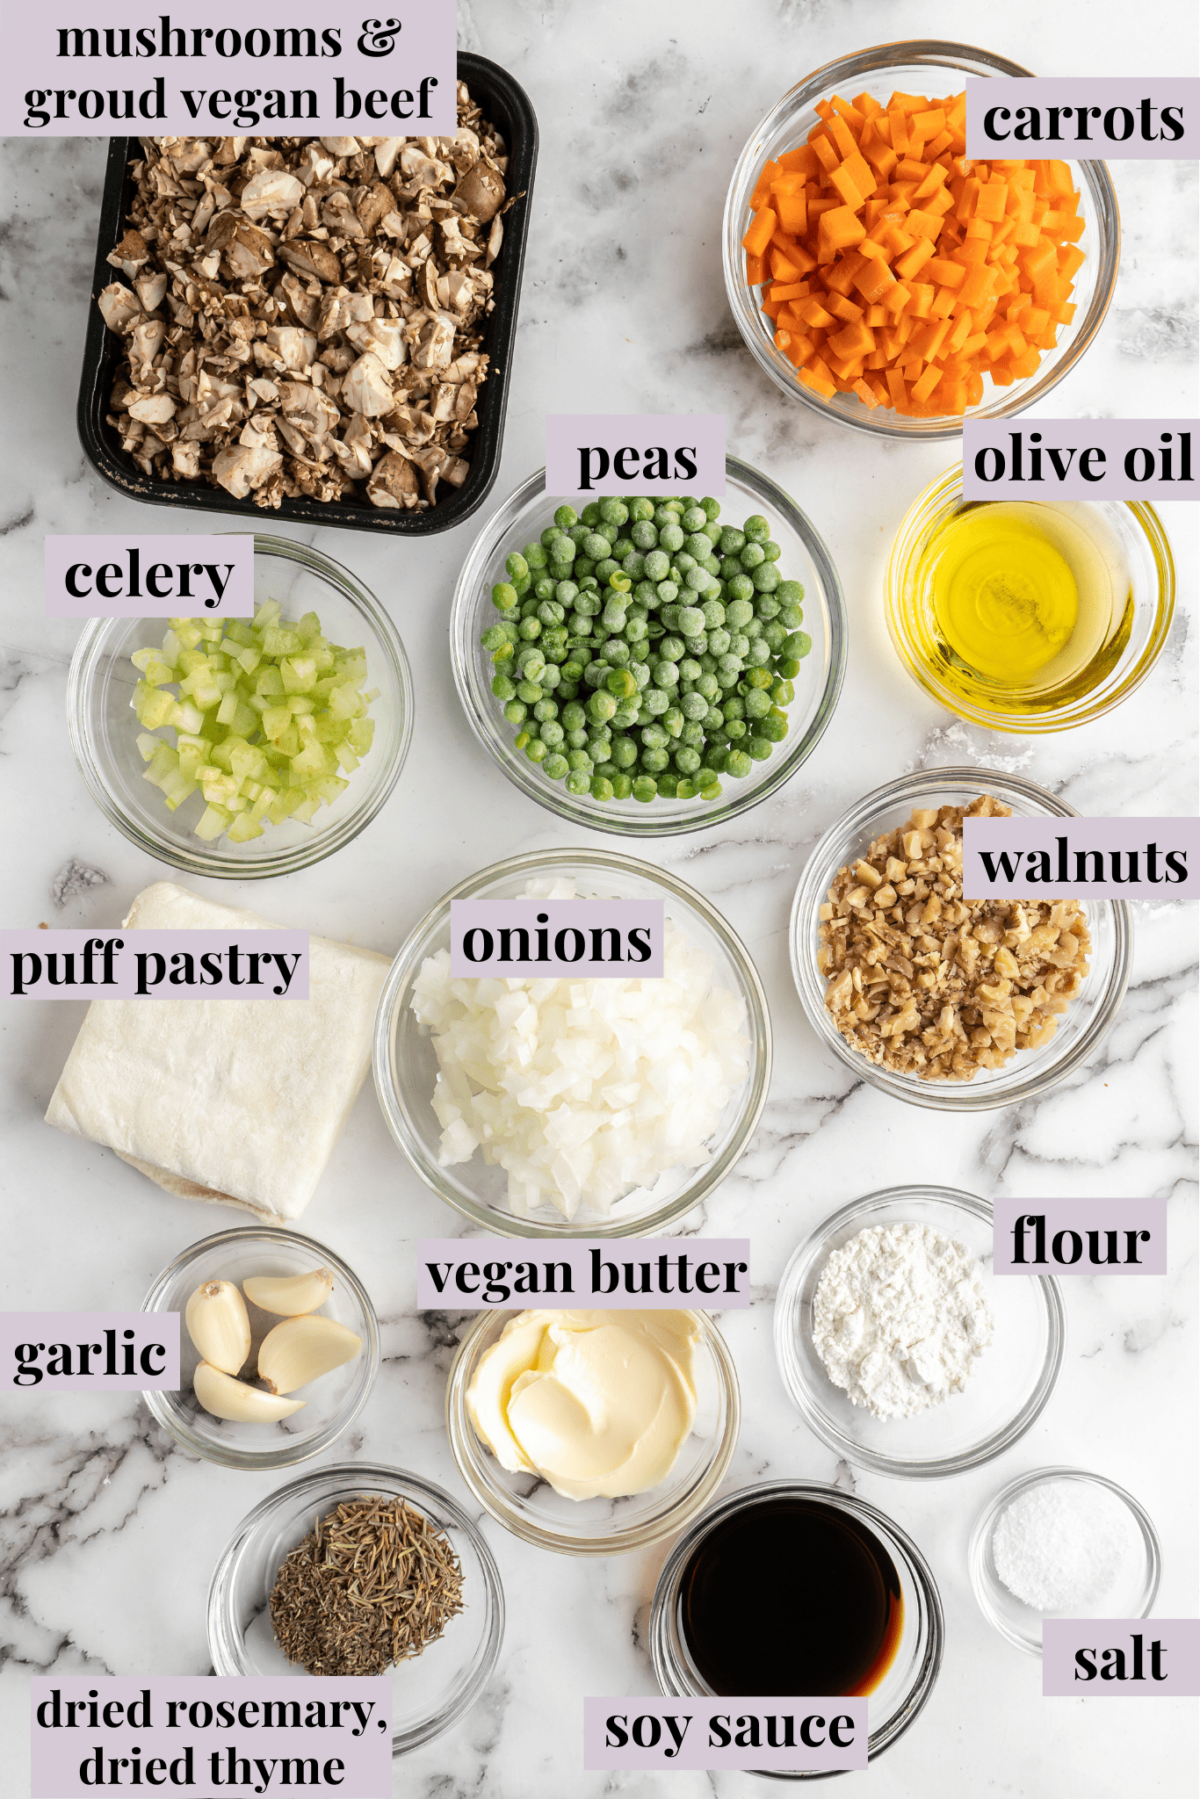 Overhead view of the ingredients for vegan wellingtons: a container of mushrooms and vegan beef, a bowl of carrots, a bowl of celery, a bowl of onions, a bowl of frozen peas, a bowl of walnuts, a bowl of flour, a bowl of olive oil, a bowl of garlic, a bowl of vegan butter, and a chunk of puff pastry